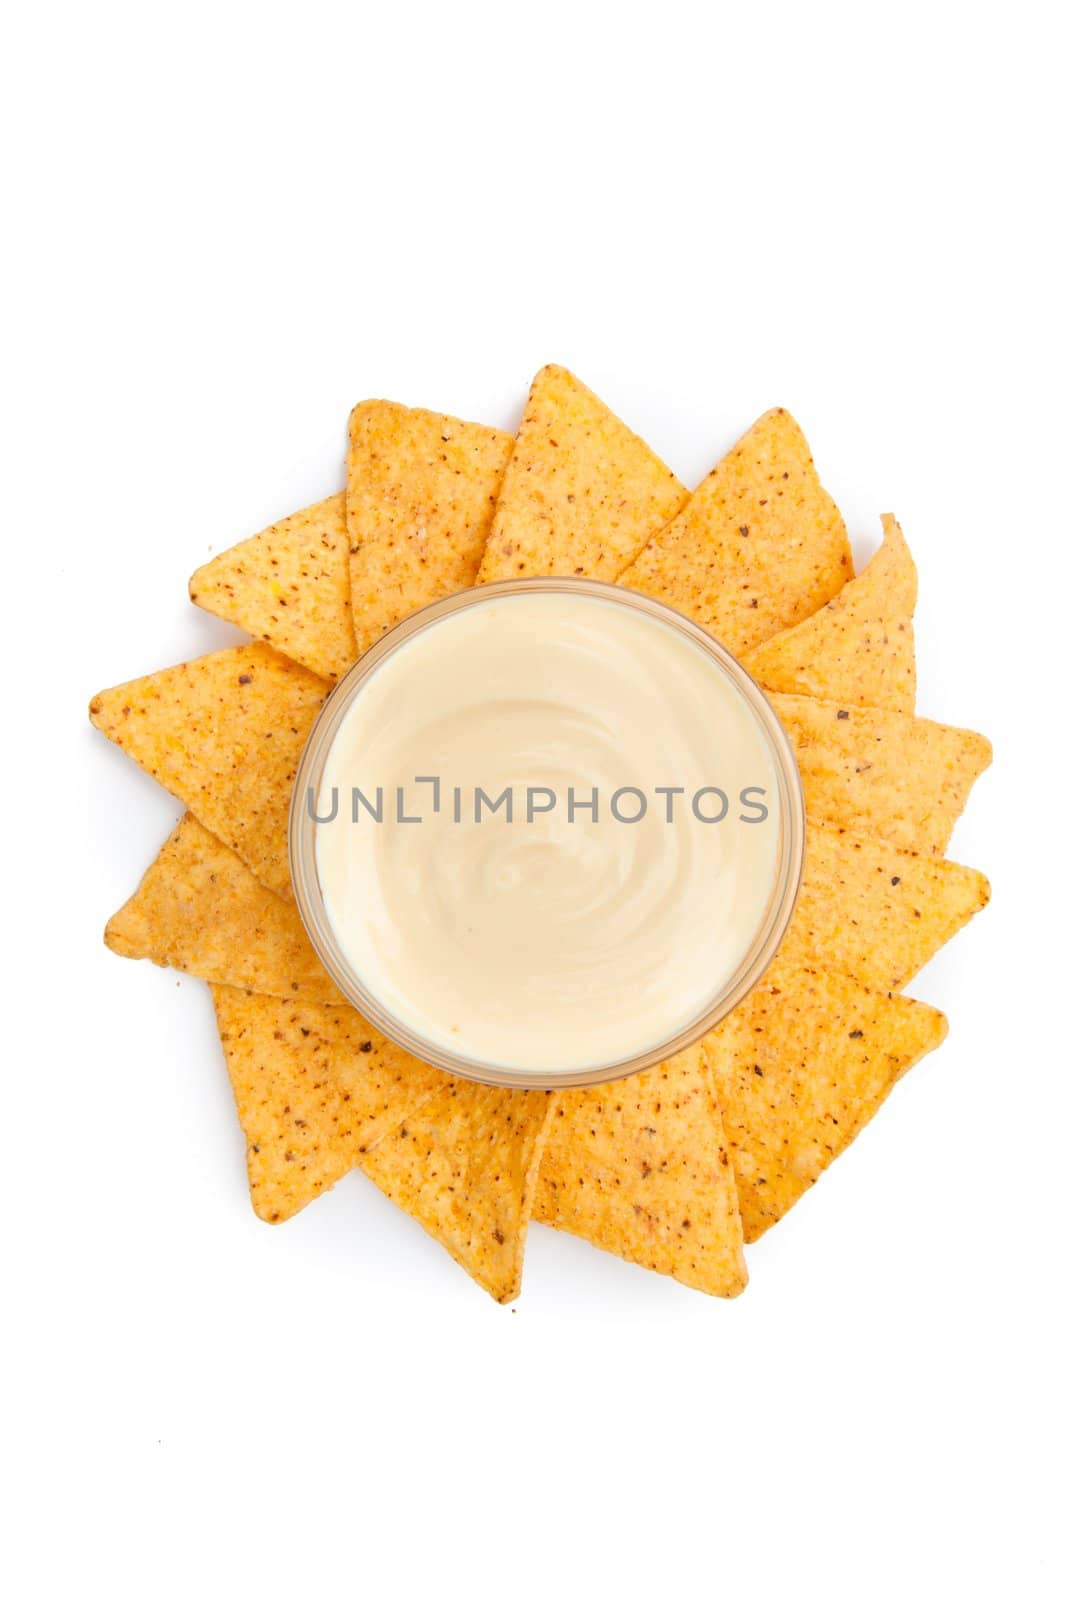 Nachos placed around a bowl of white dip against a white background